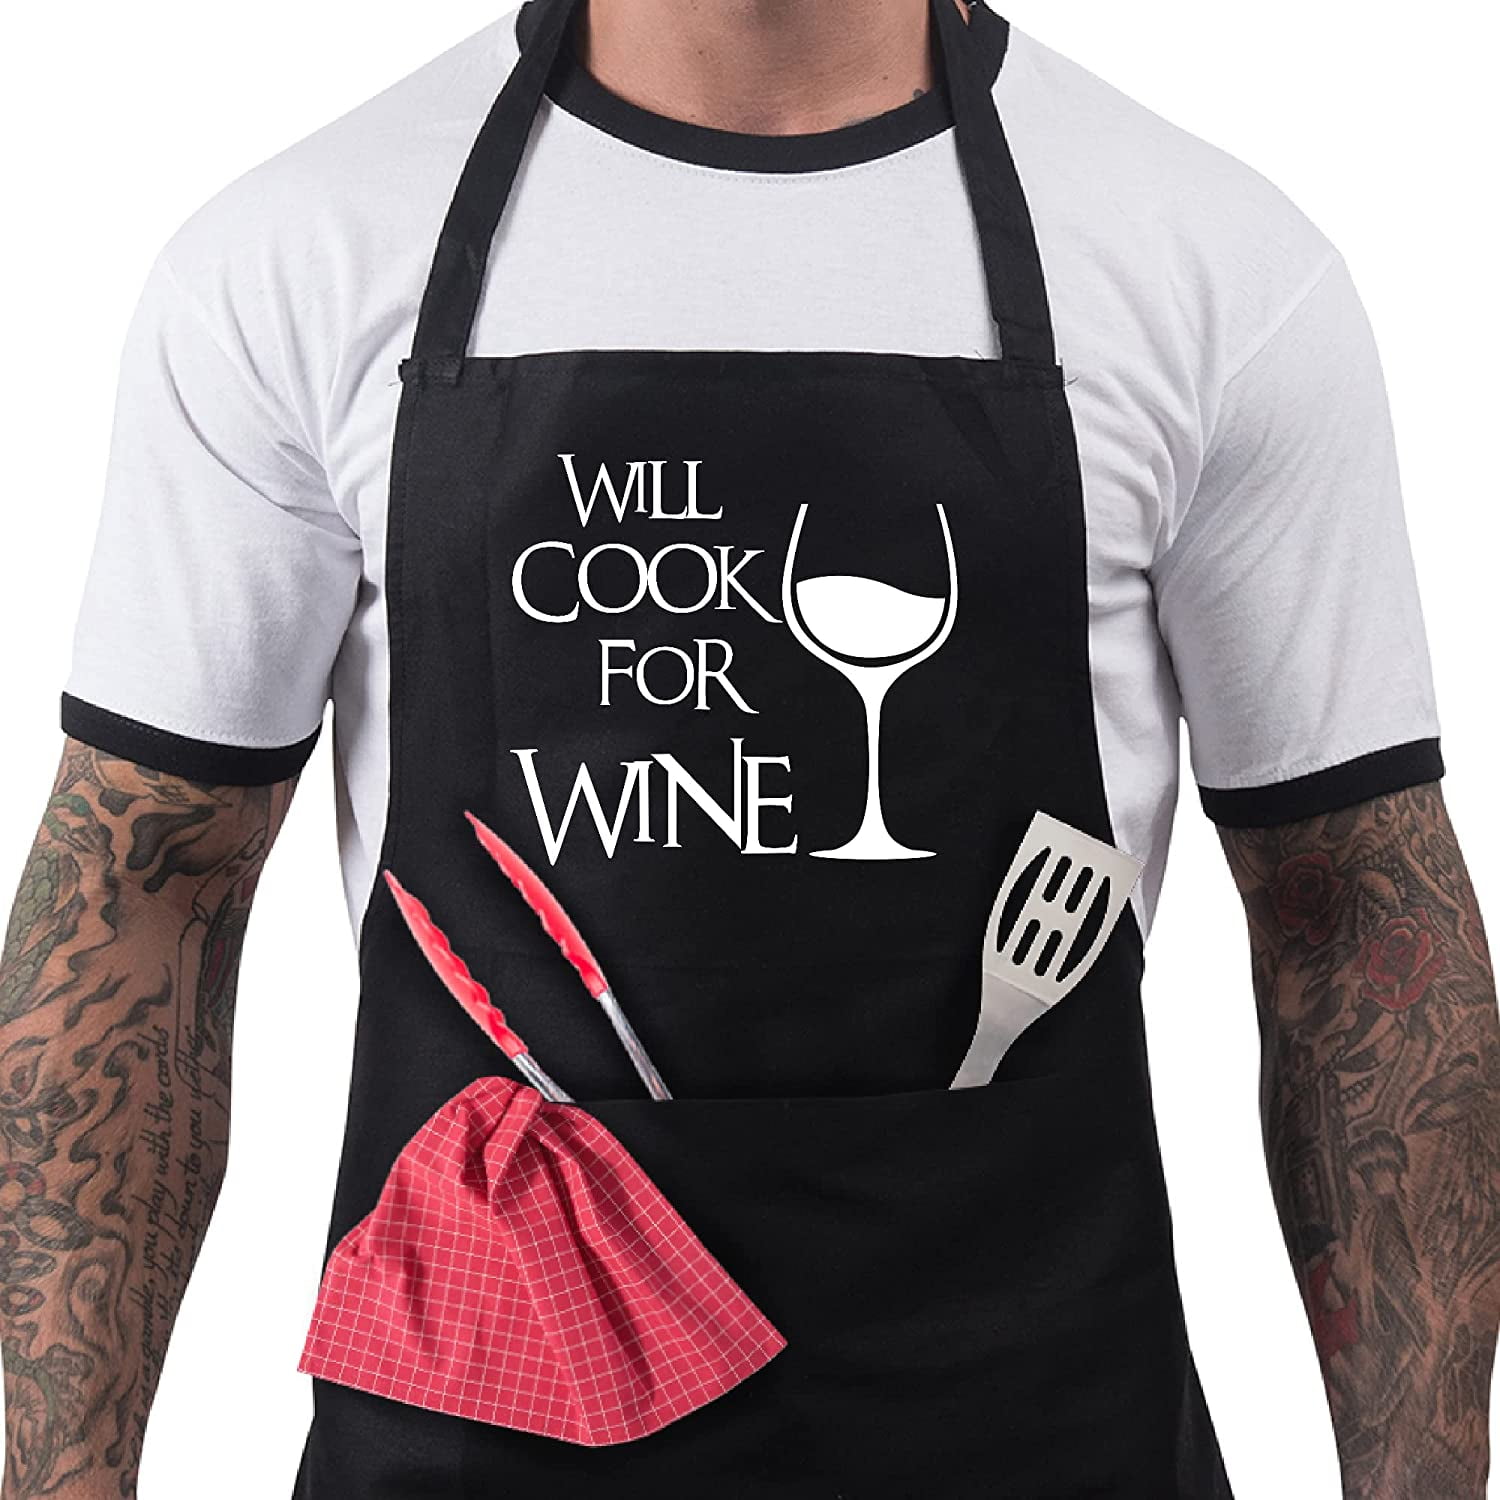 My Job Is Top Secret BBQ Cooking Funny Novelty Apron 